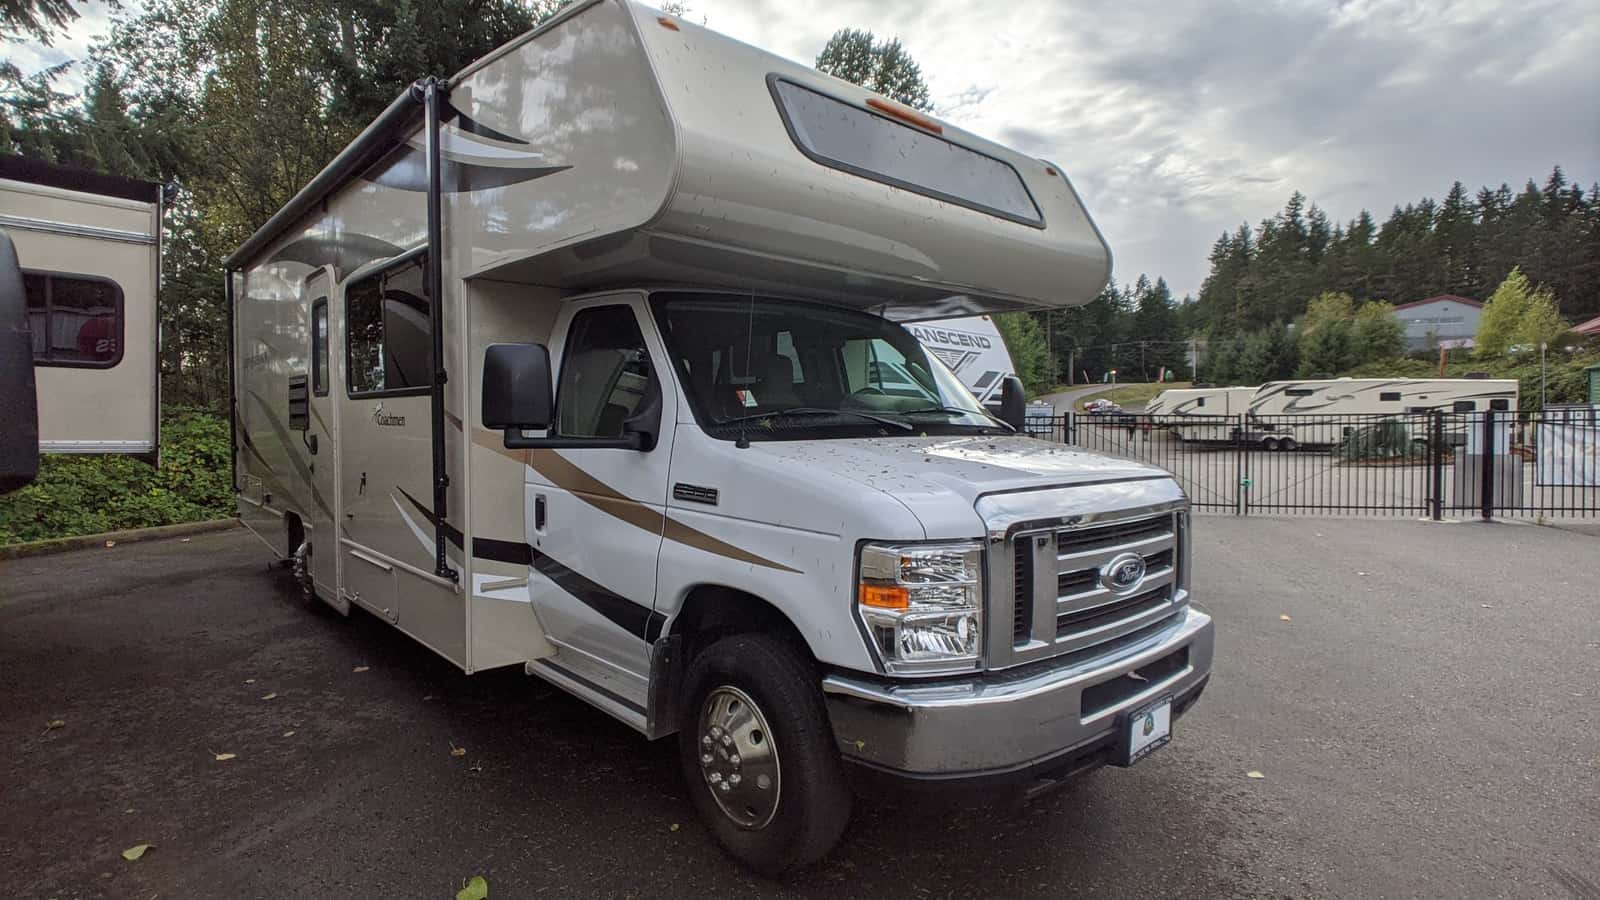 2021 Jayco Eagle Ht 284bhok For Sale In Silverdale Wa Rv Trader